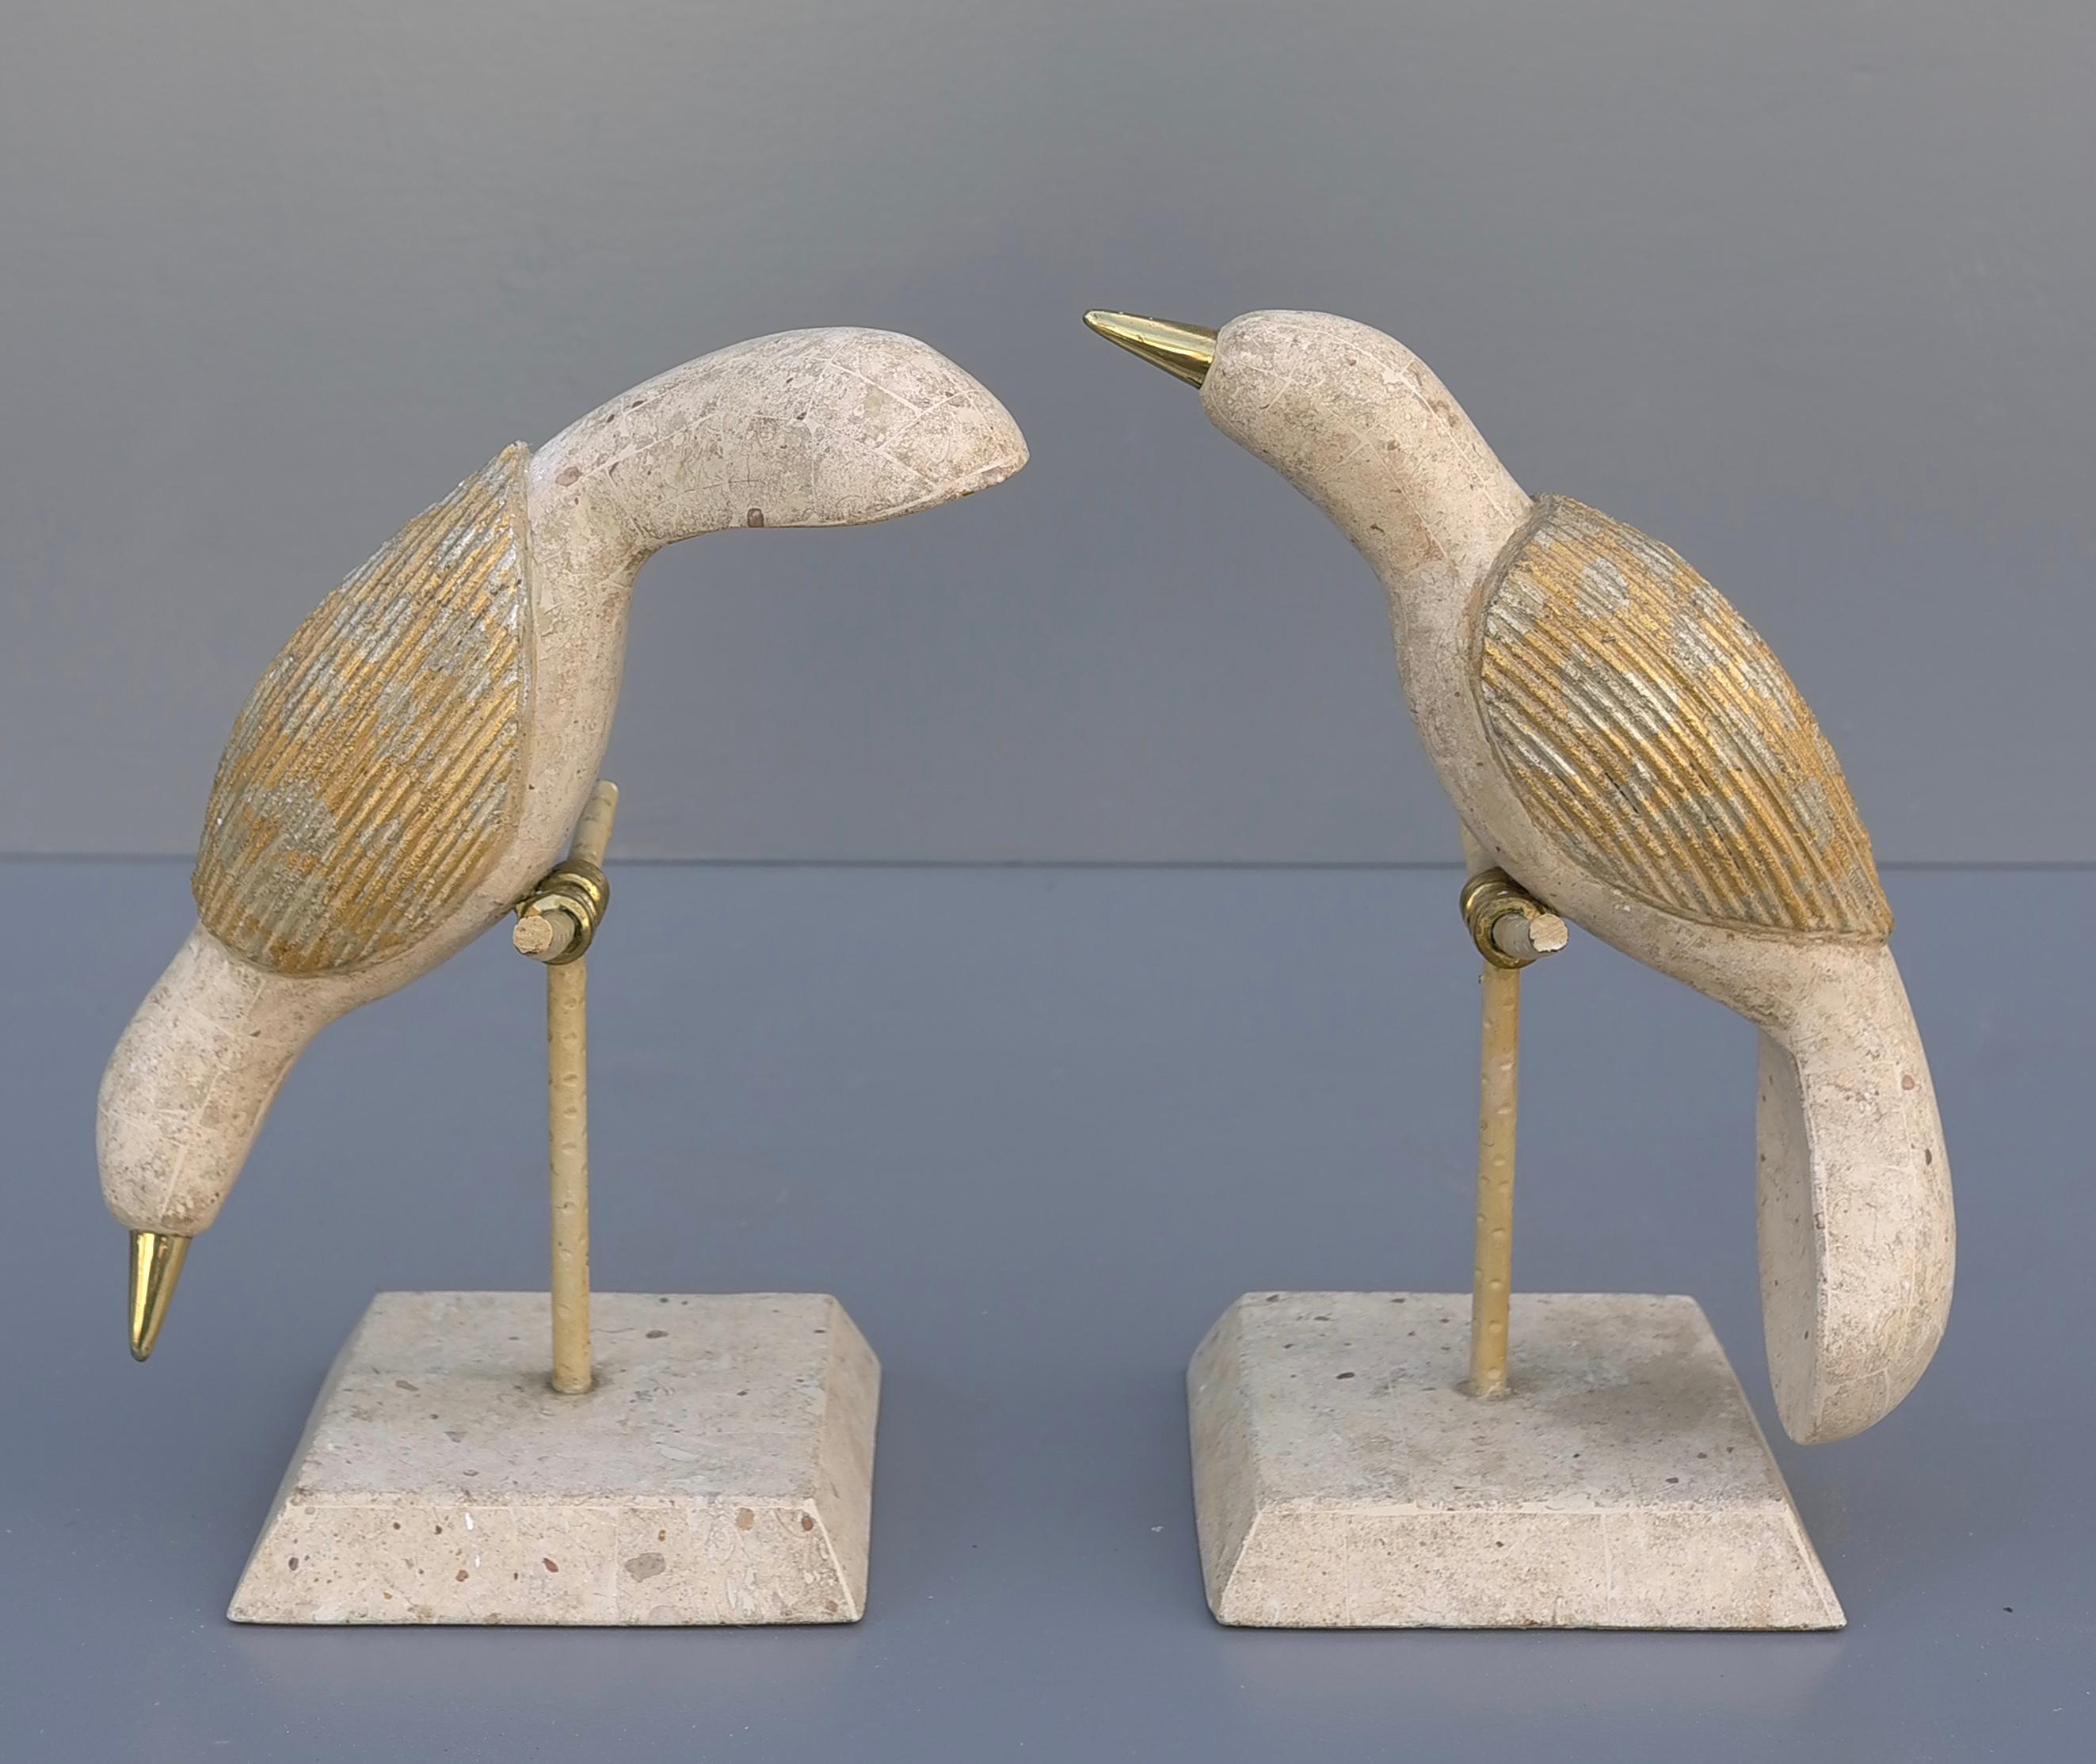 Tessellated Stone and Brass Birds Abstract Sculptures by Maitland Smith 1970's For Sale 4